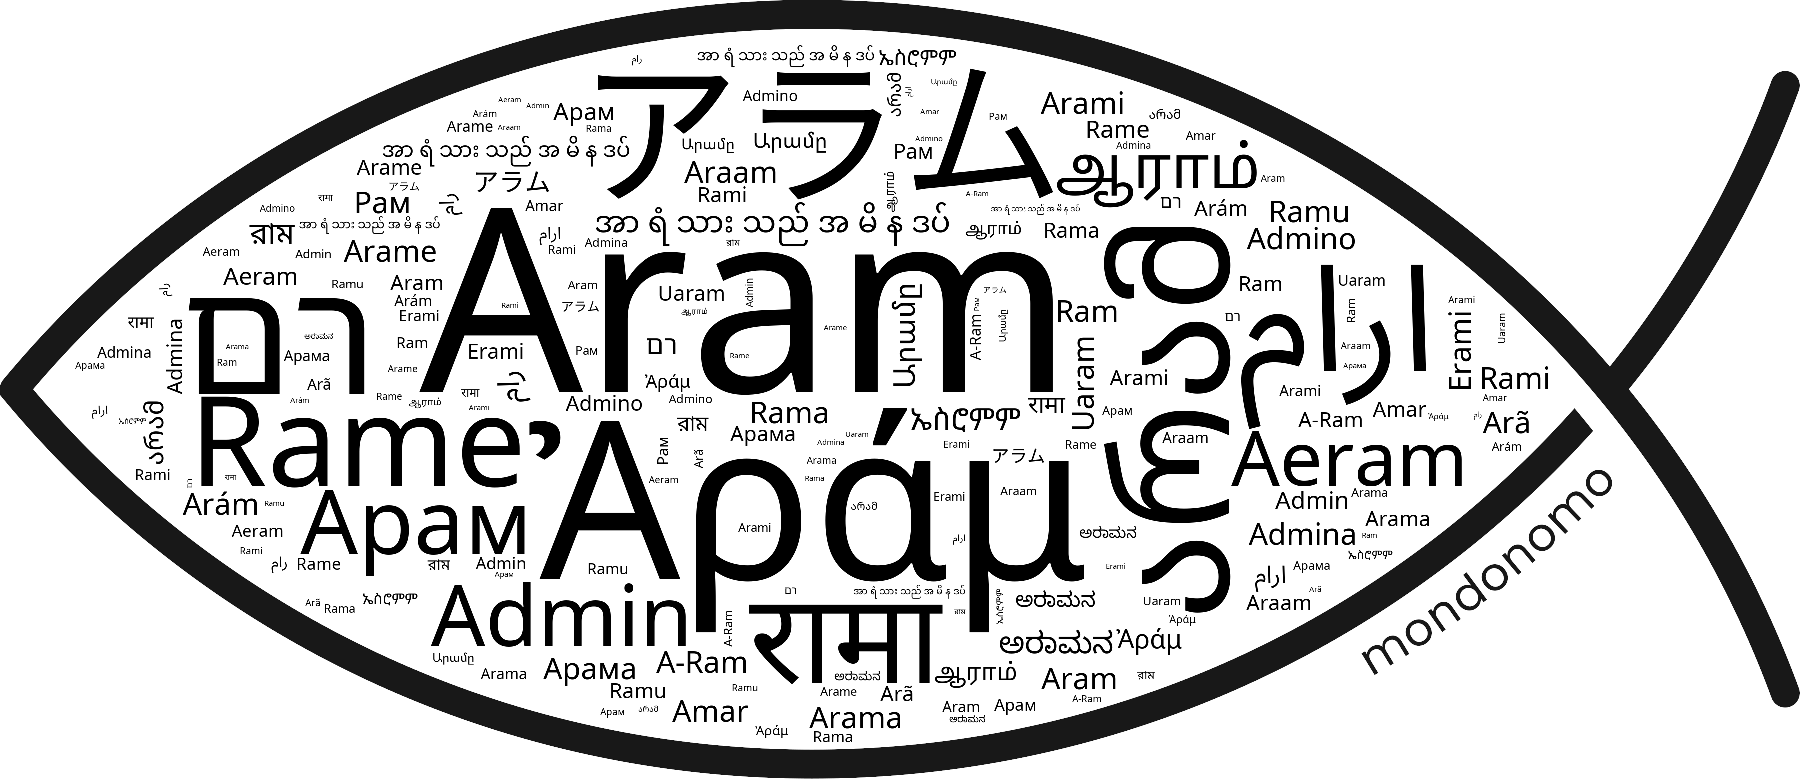 Name Aram in the world's Bibles